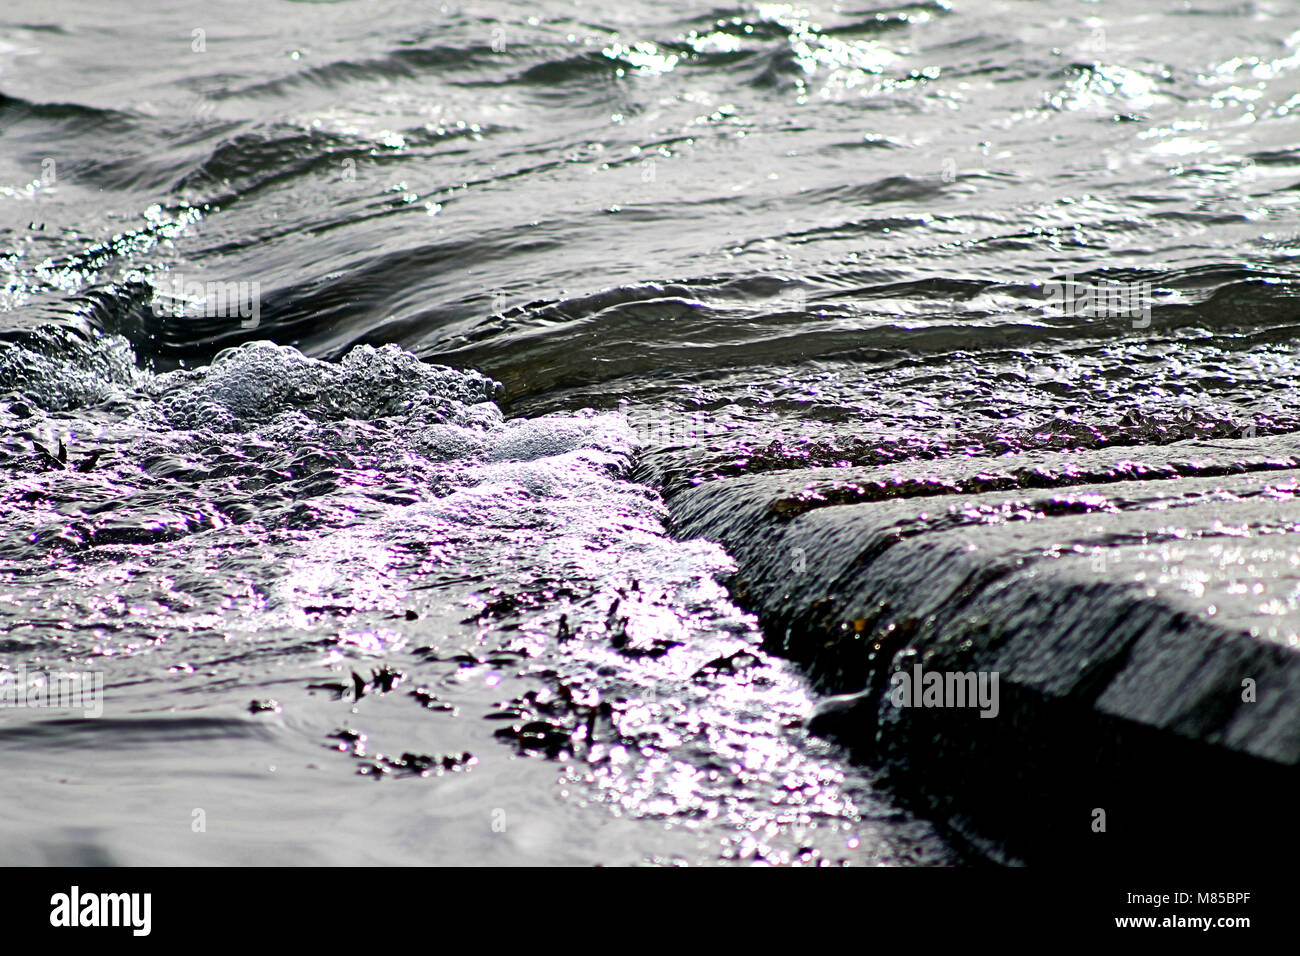 wave ripples falling over a slipway at dawn with the light shining through the bubbles. Ireland coastline Stock Photo